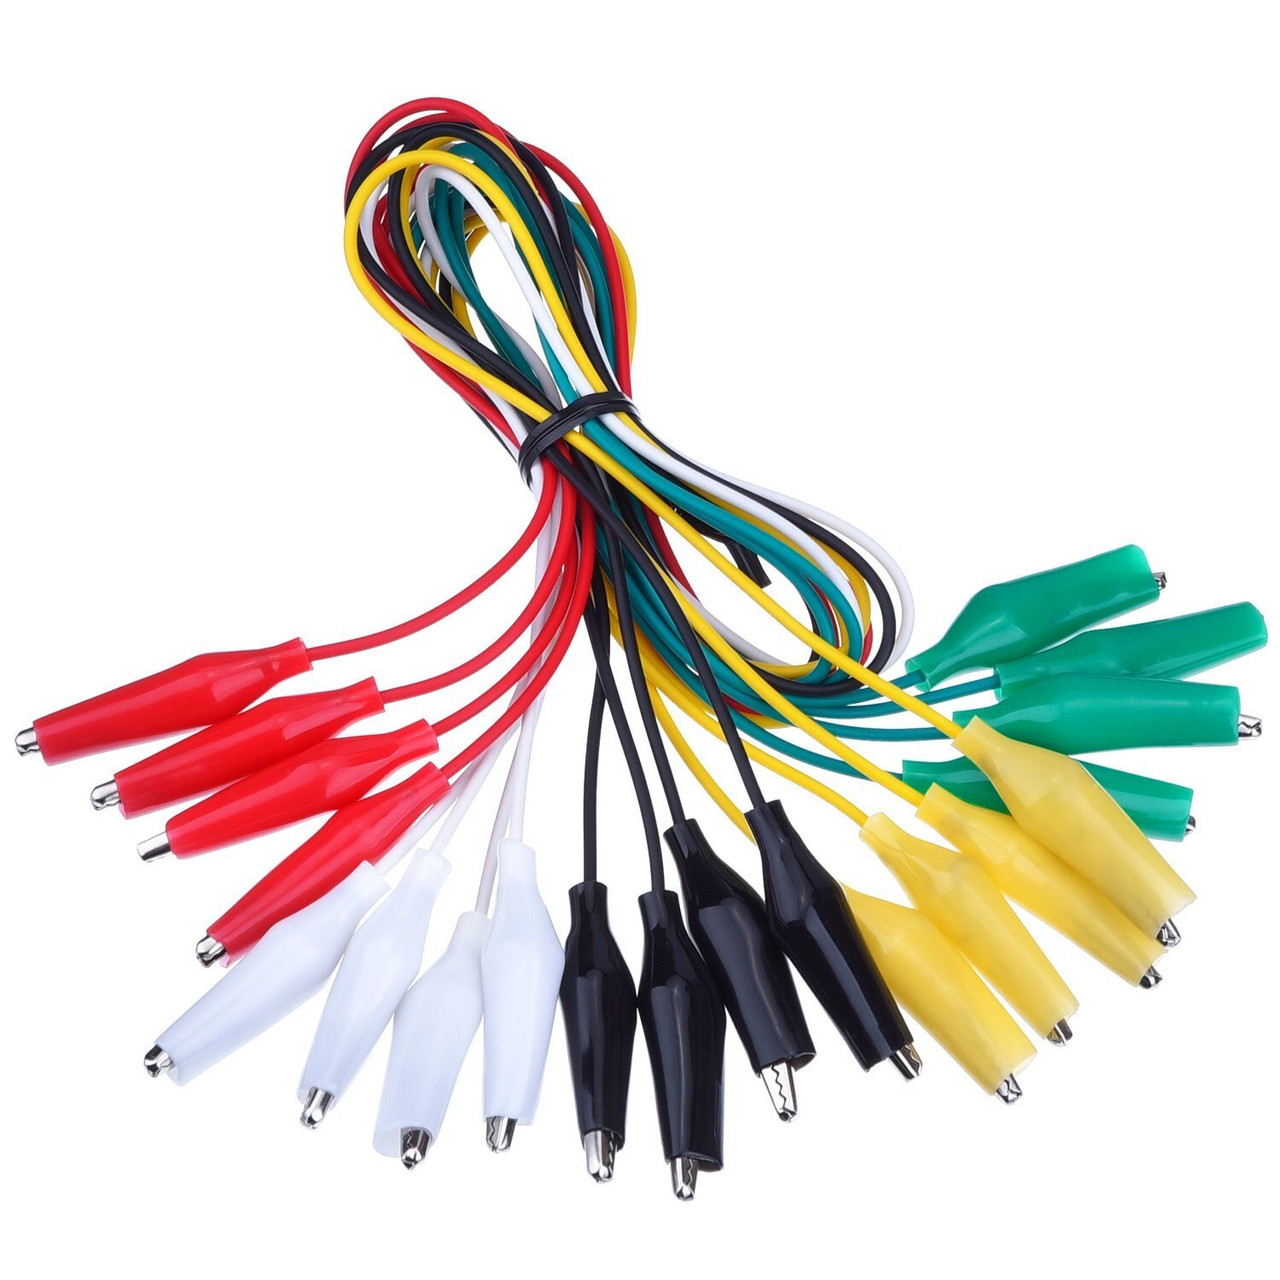 Details about   10pcs coloured Alligator/Crocodile Test Leads/Clamps Jumper Cable Wire 